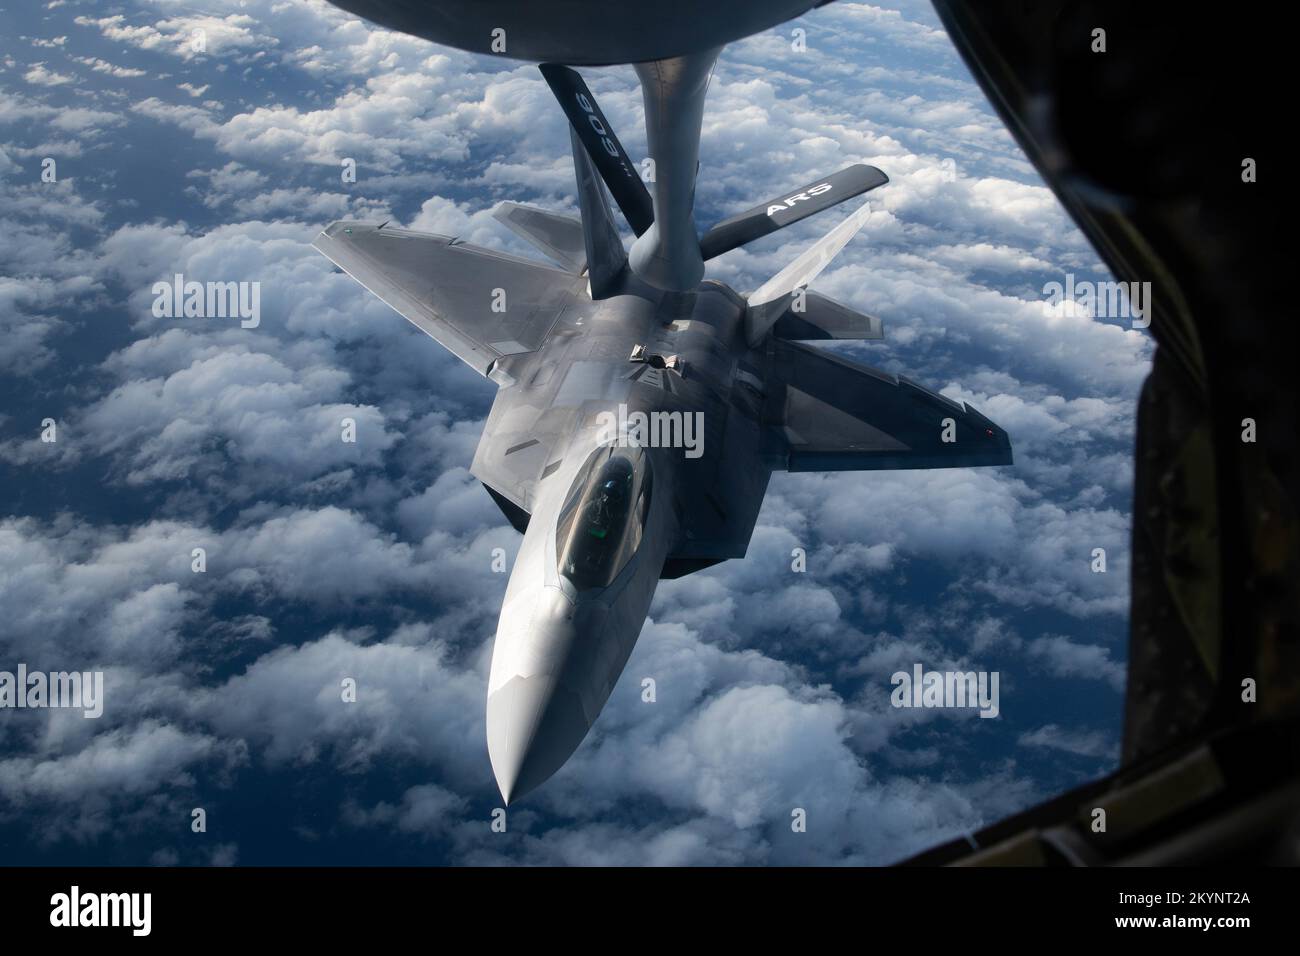 Pacific Ocean, International Waters. 30th Nov, 2022. Pacific Ocean, International Waters. 30 November, 2022. A U.S. Air Force F-22A Raptor fighter jet, assigned to the 3rd Fighter Wing, approaches a KC-135 Stratotanker refueling aircraft during a patrol mission, November 30, 2022 over the Pacific Ocean. Credit: A1C Tylir Meyer/U.S. Air Force/Alamy Live News Stock Photo